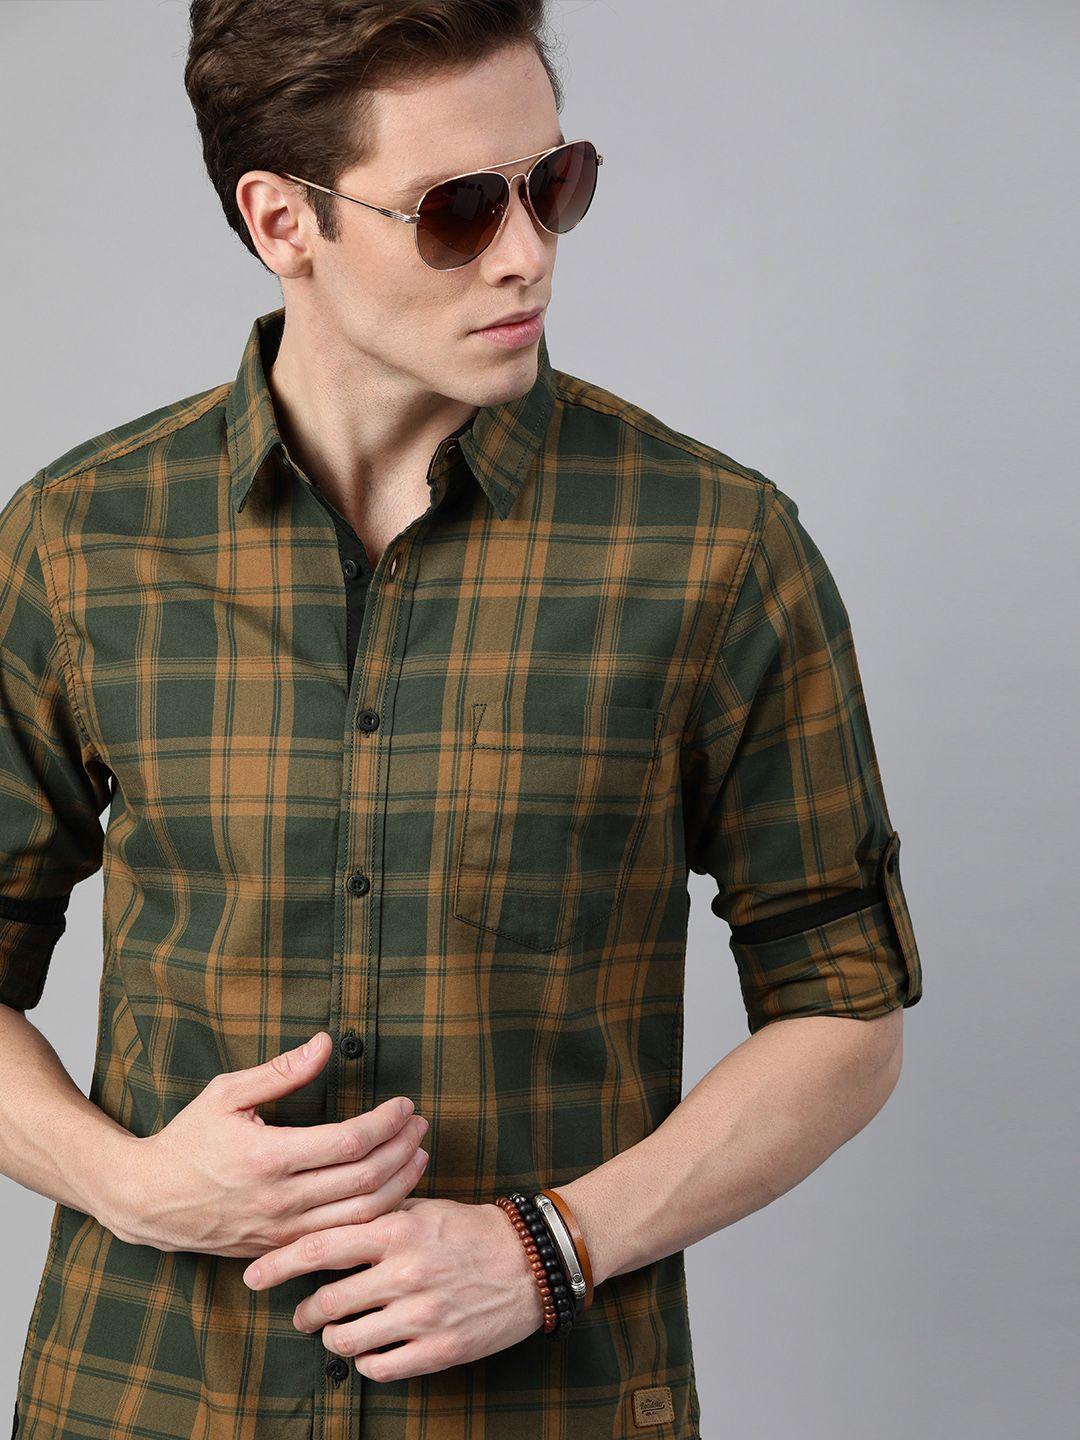 roadster men olive green & mustard yellow checked pure cotton casual sustainable shirt